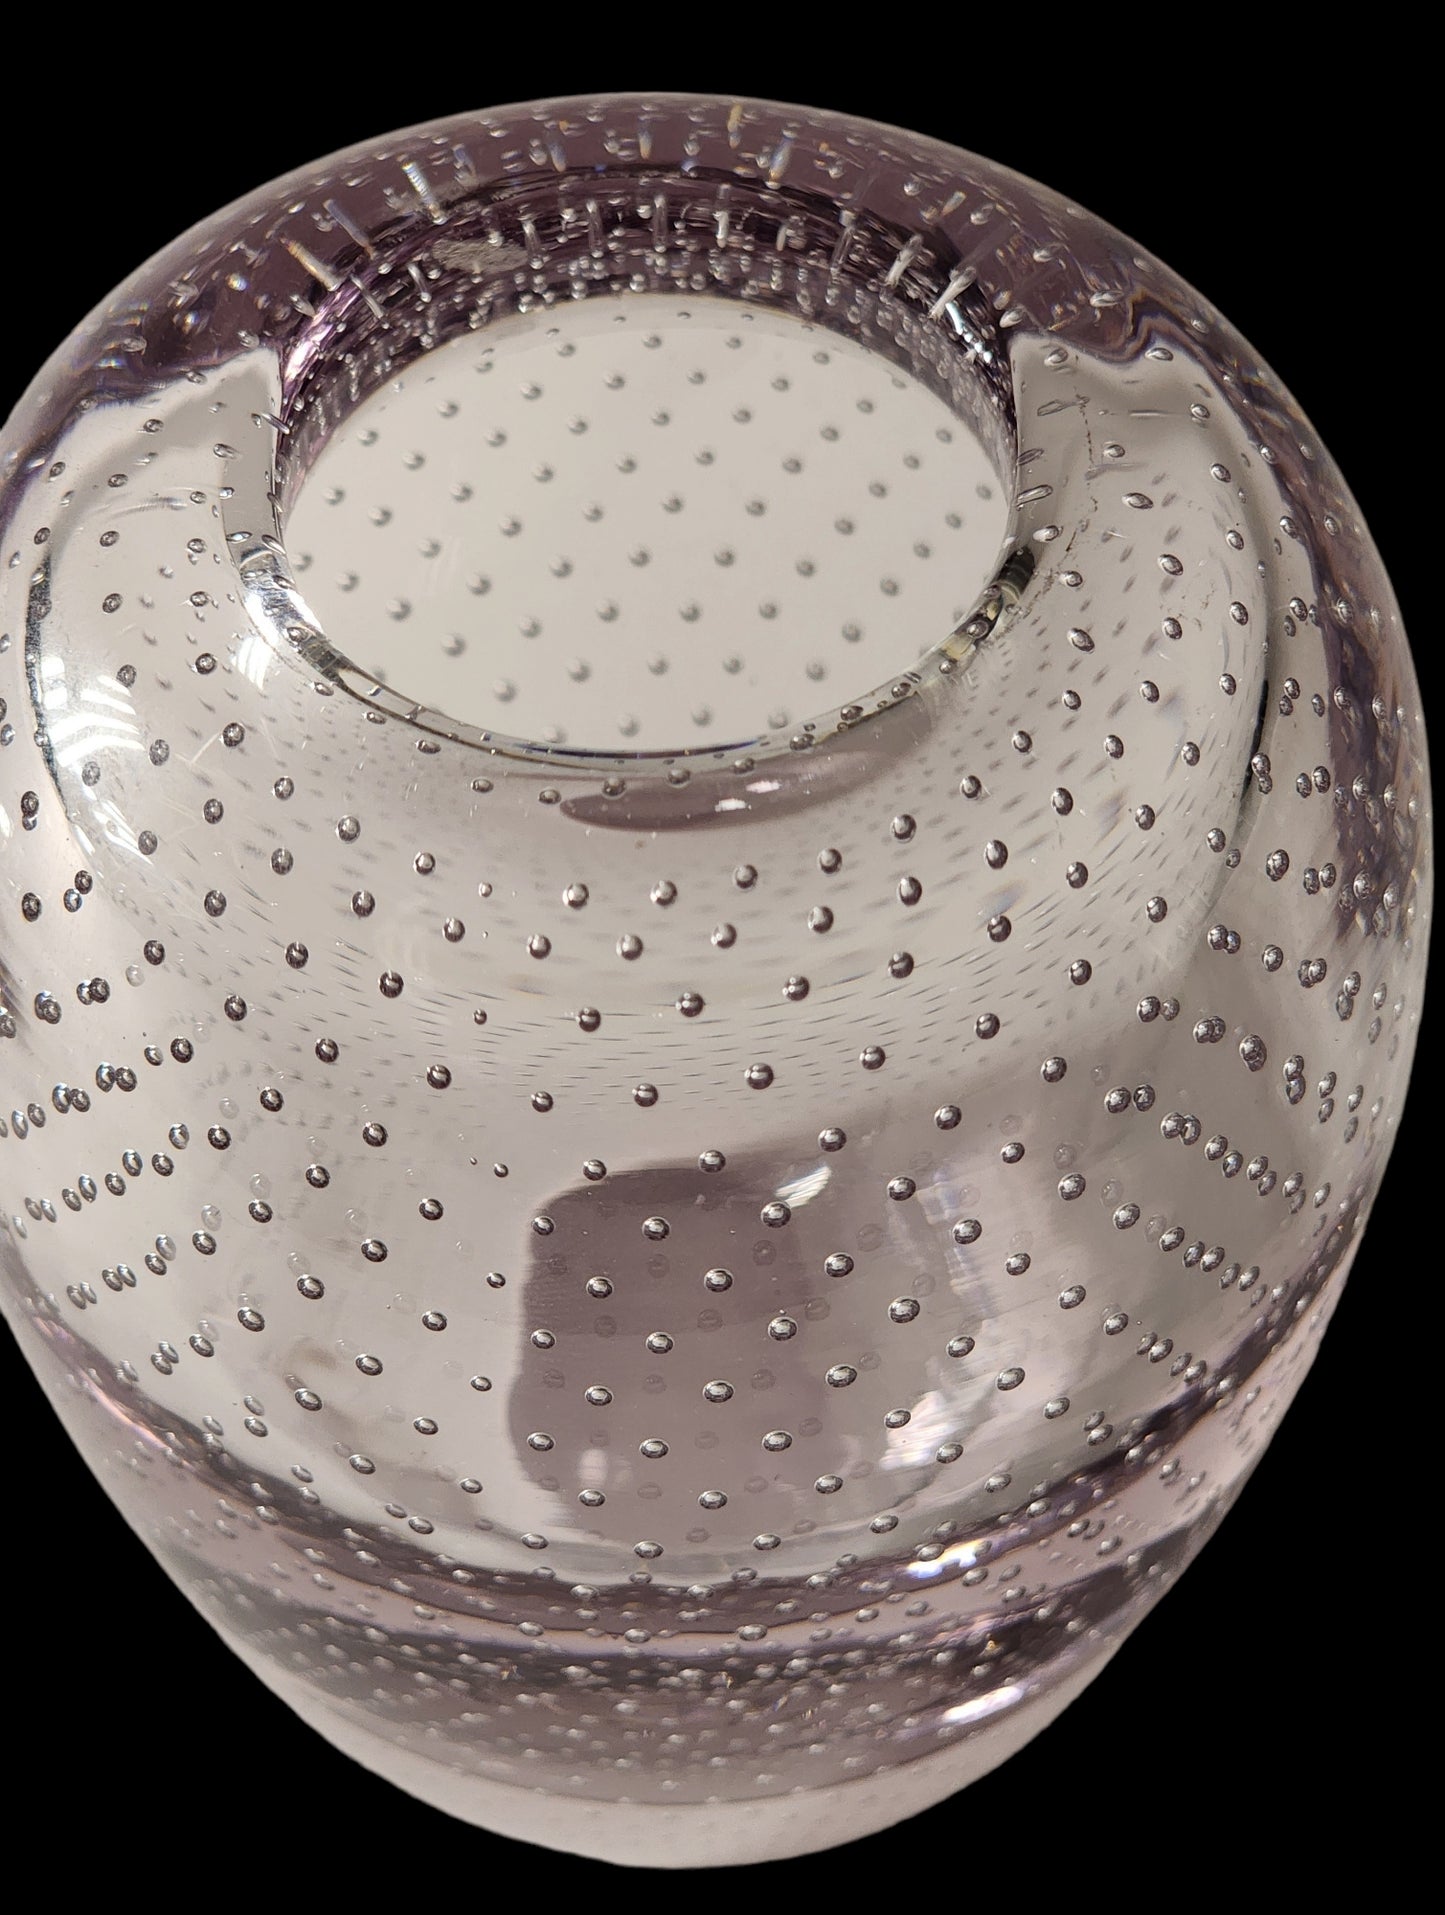 Erickson glass vase with controlled bubbles